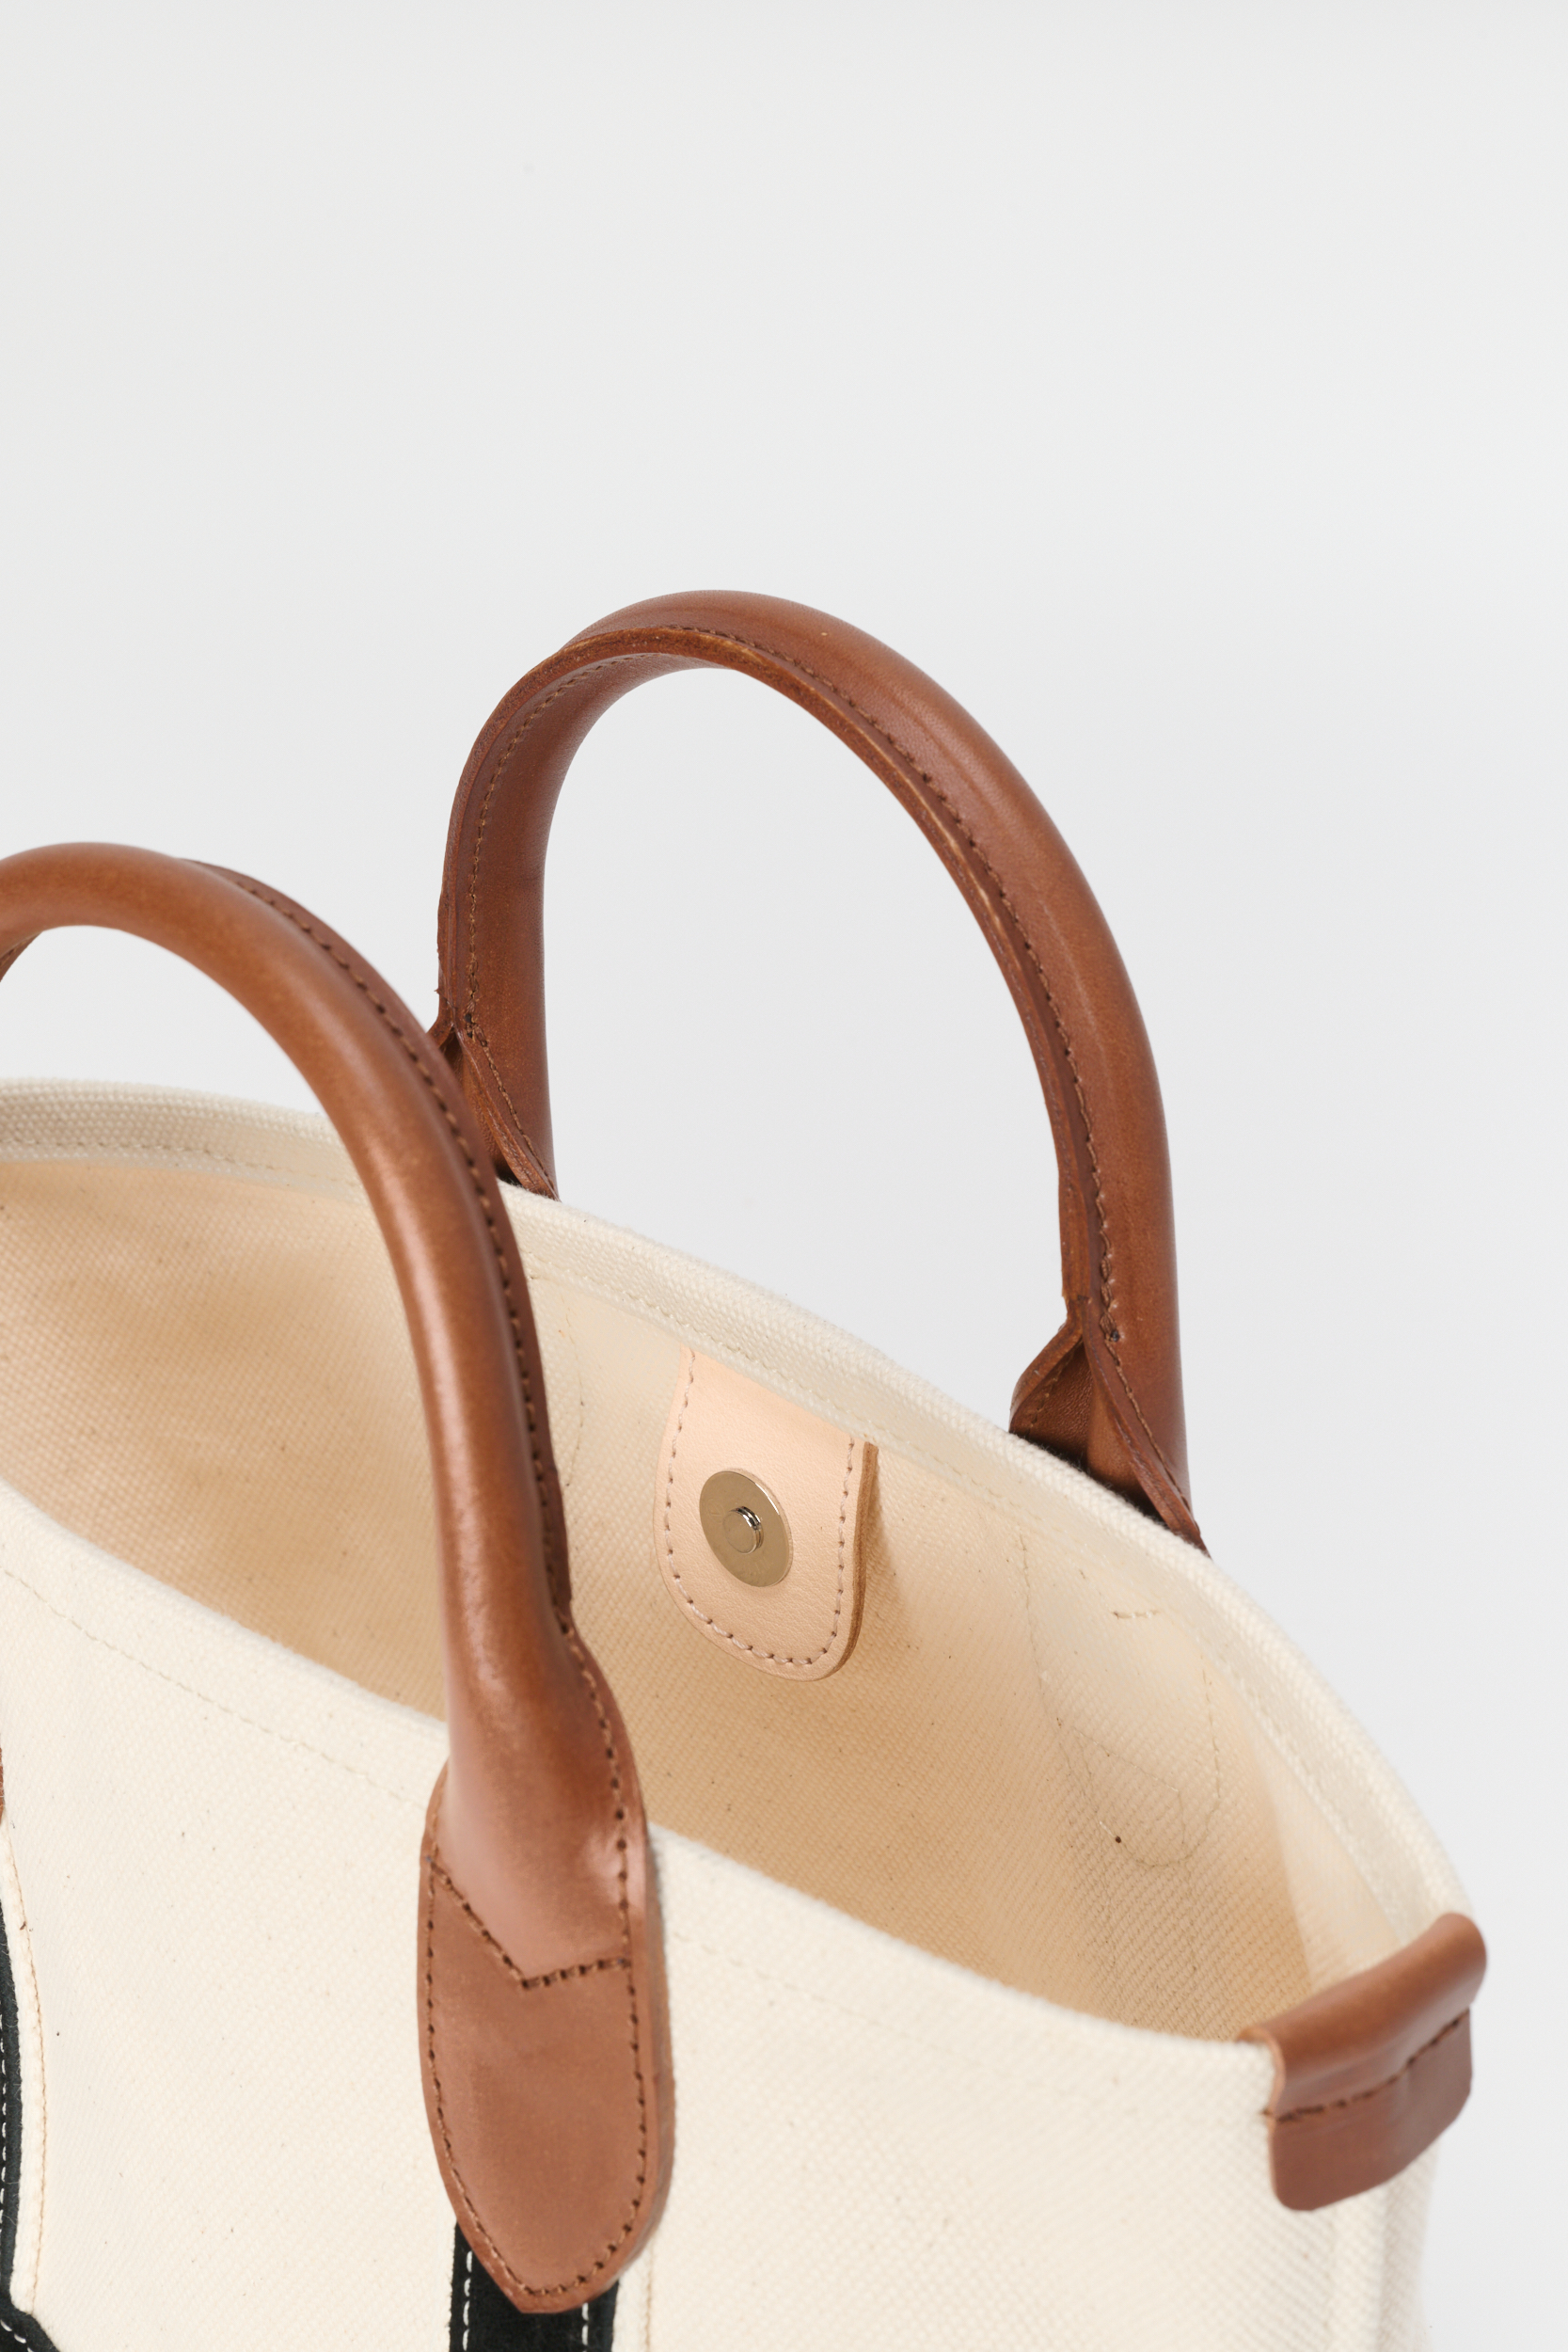 Hender Scheme campus suede handle tote M_camel エンダースキーマ トートバッグ 正規取扱店 公式通販 送料無料